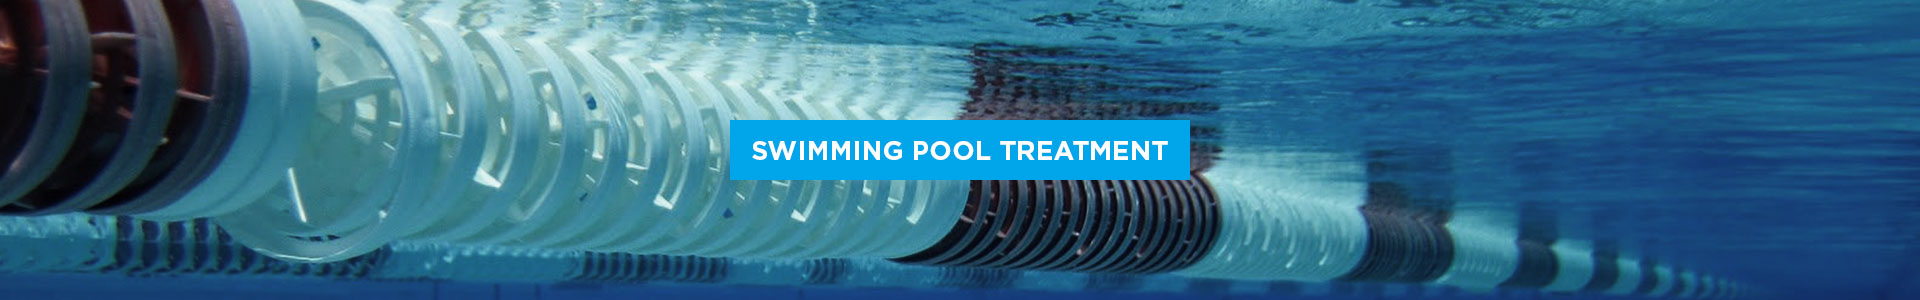 Water Treatment Solution for Swimming Pool